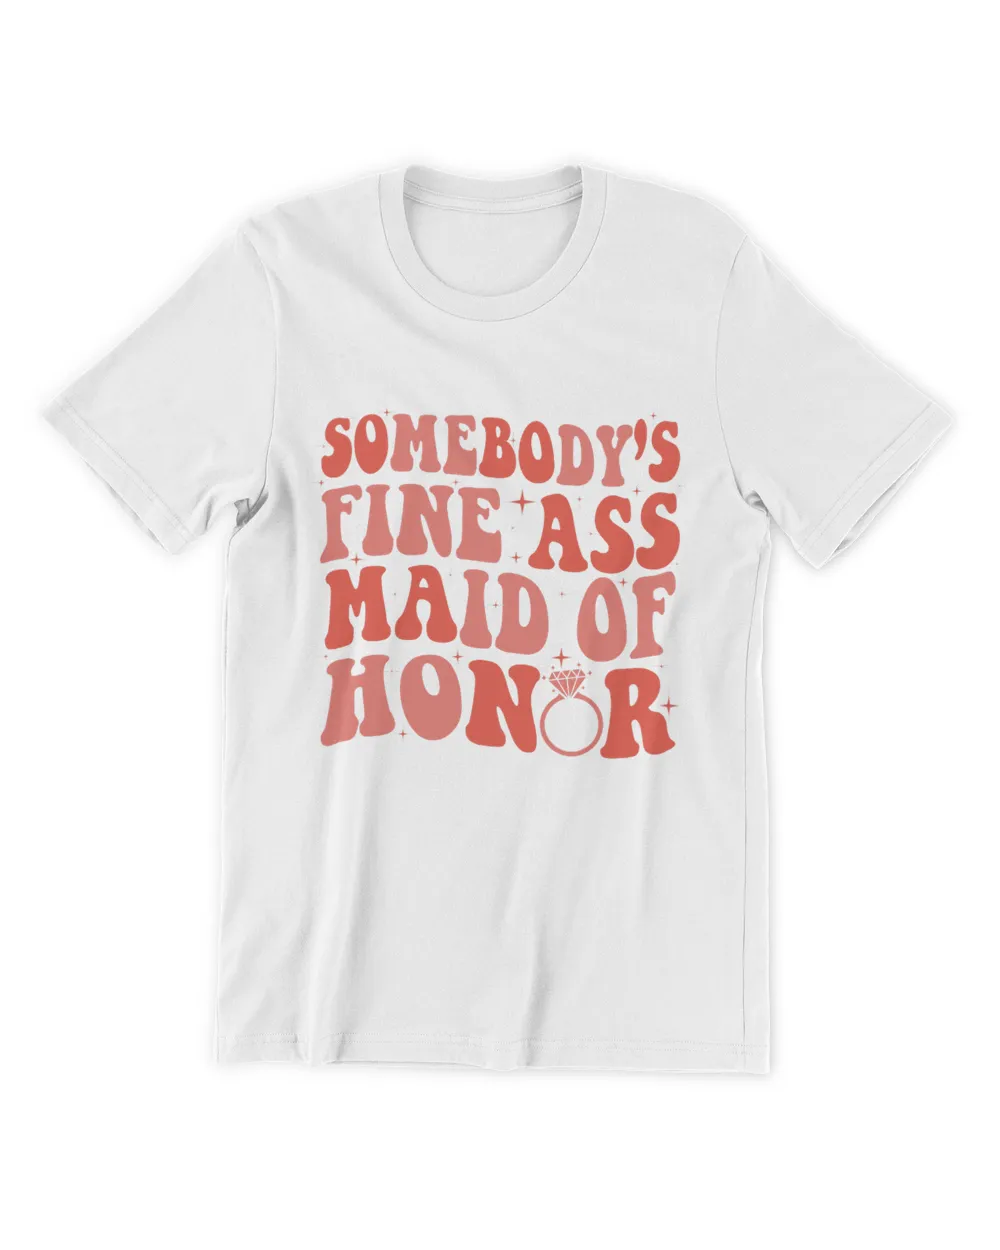 Somebodys Fine Ass Maid Of Honor Shirt, MOH Shirt, Maid of Honor Shirt, Bridesmaid Shirt, Bridal Party, Bachelorette Party Gift